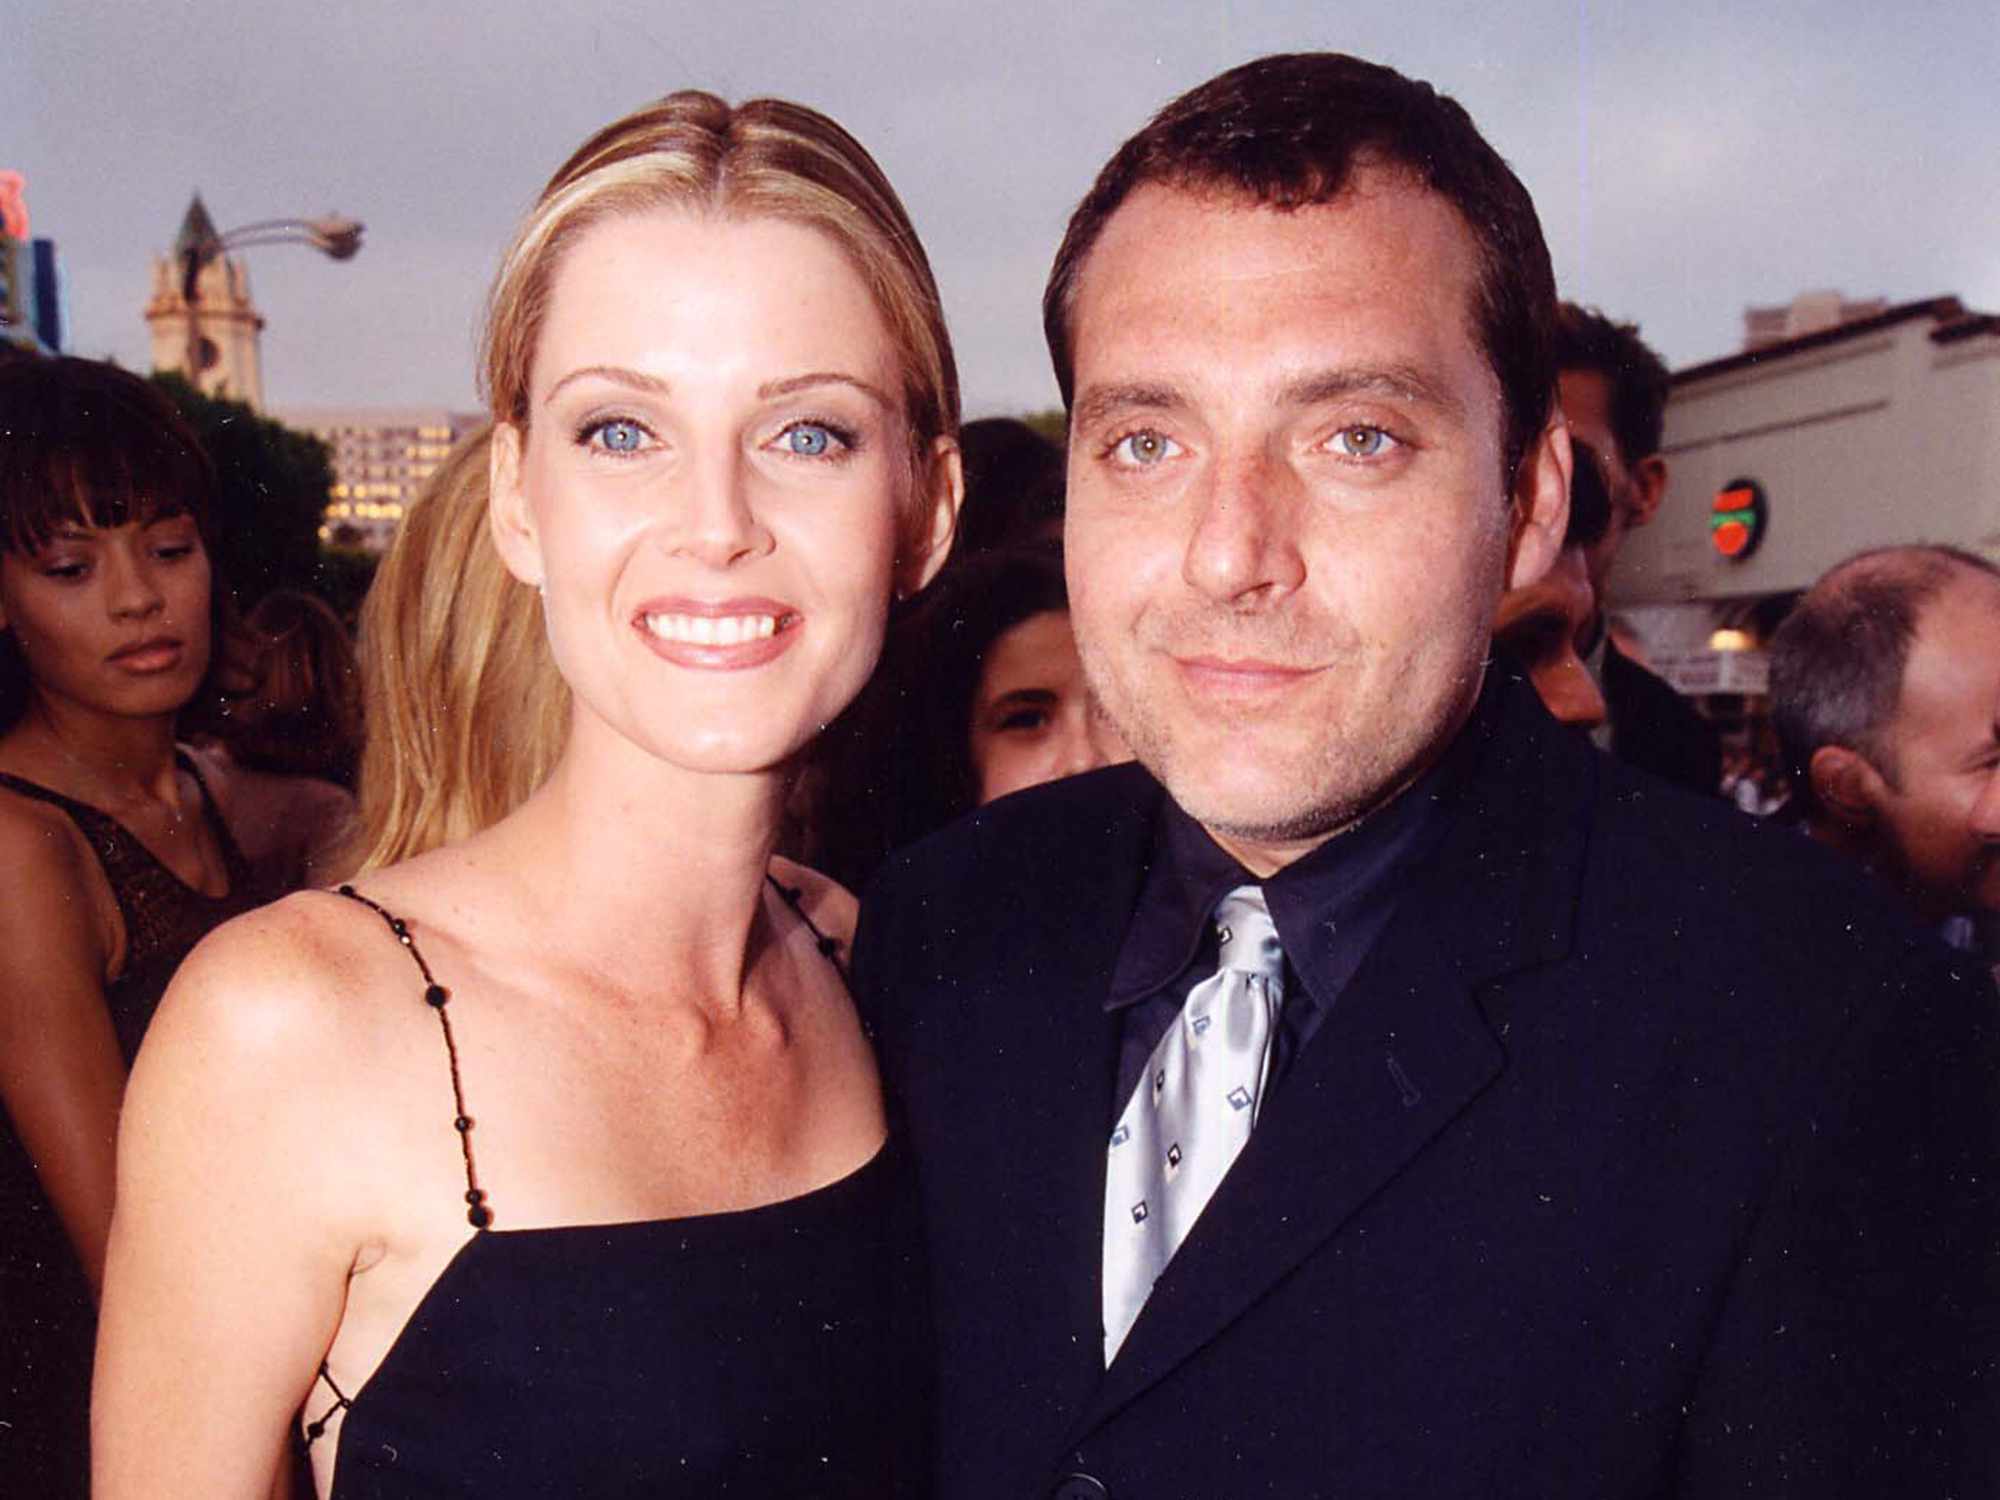 Tom Sizemore & Maeve Quinlan at the 1998 premiere of Saving Private Ryan in Westwood